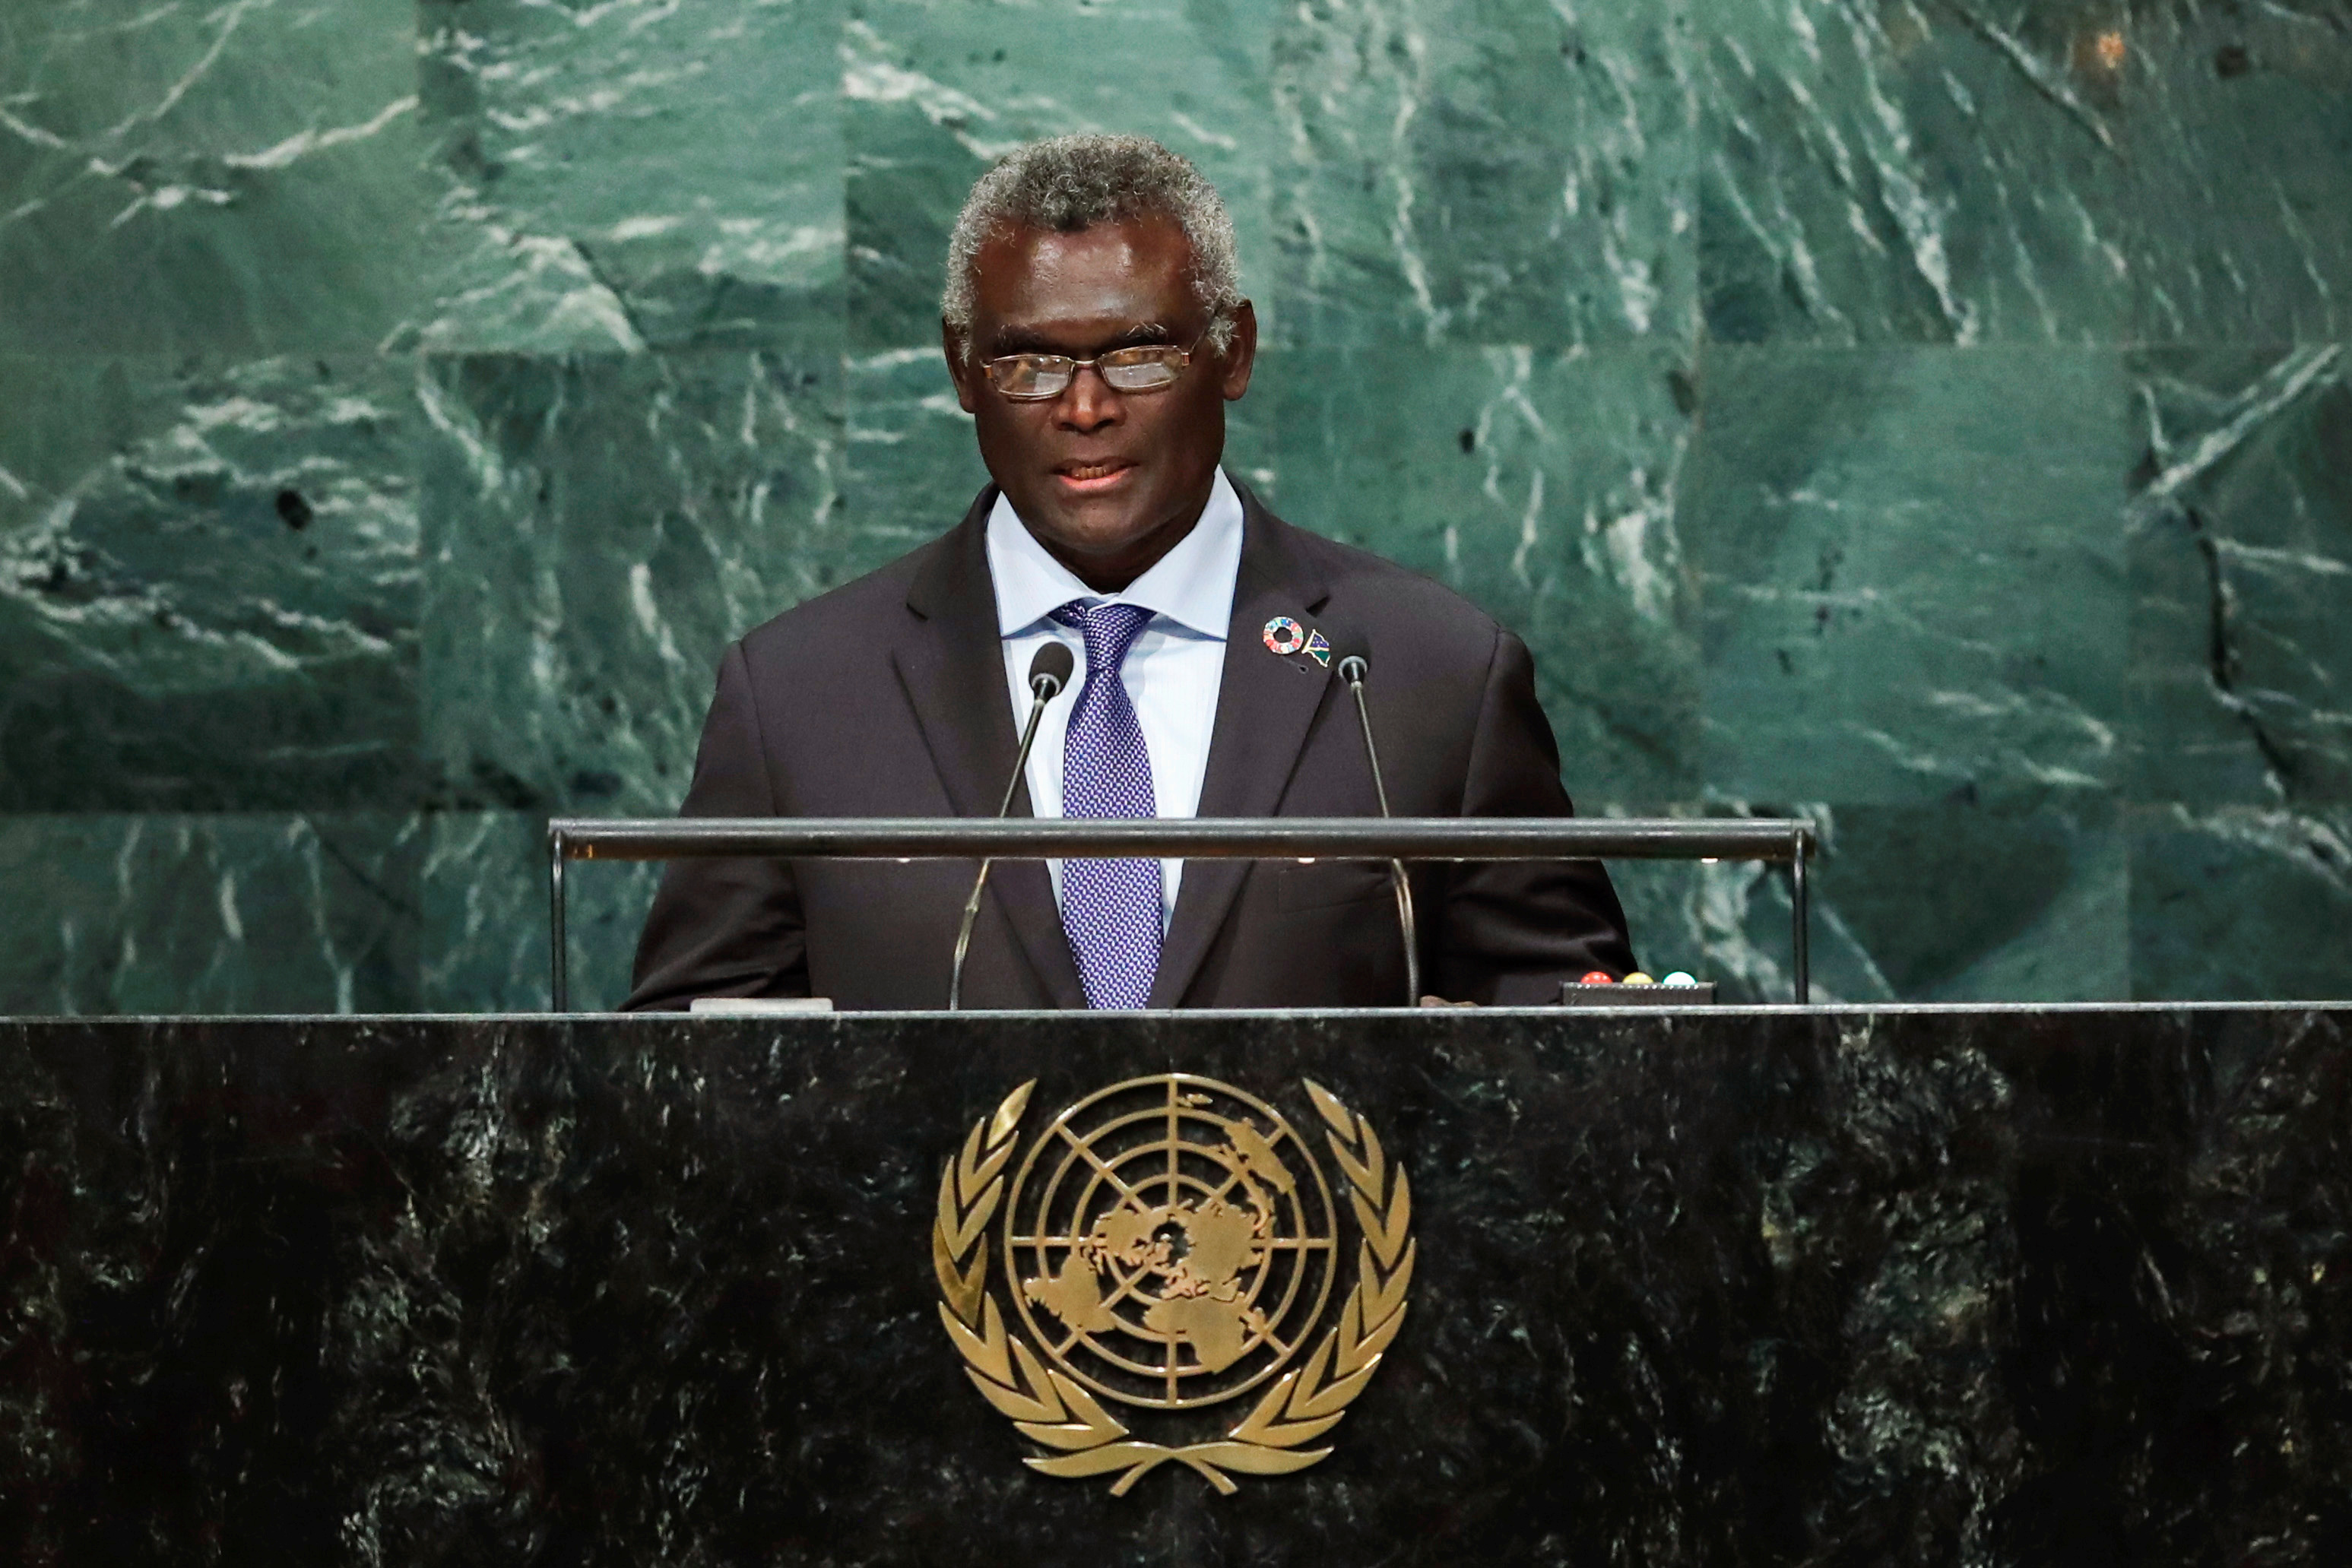 Solomon Islands PM Manasseh Sogavare has submitted a request to postpone the dissolution of parliament from May 2023 to the end of next year in a bid to delay elections.